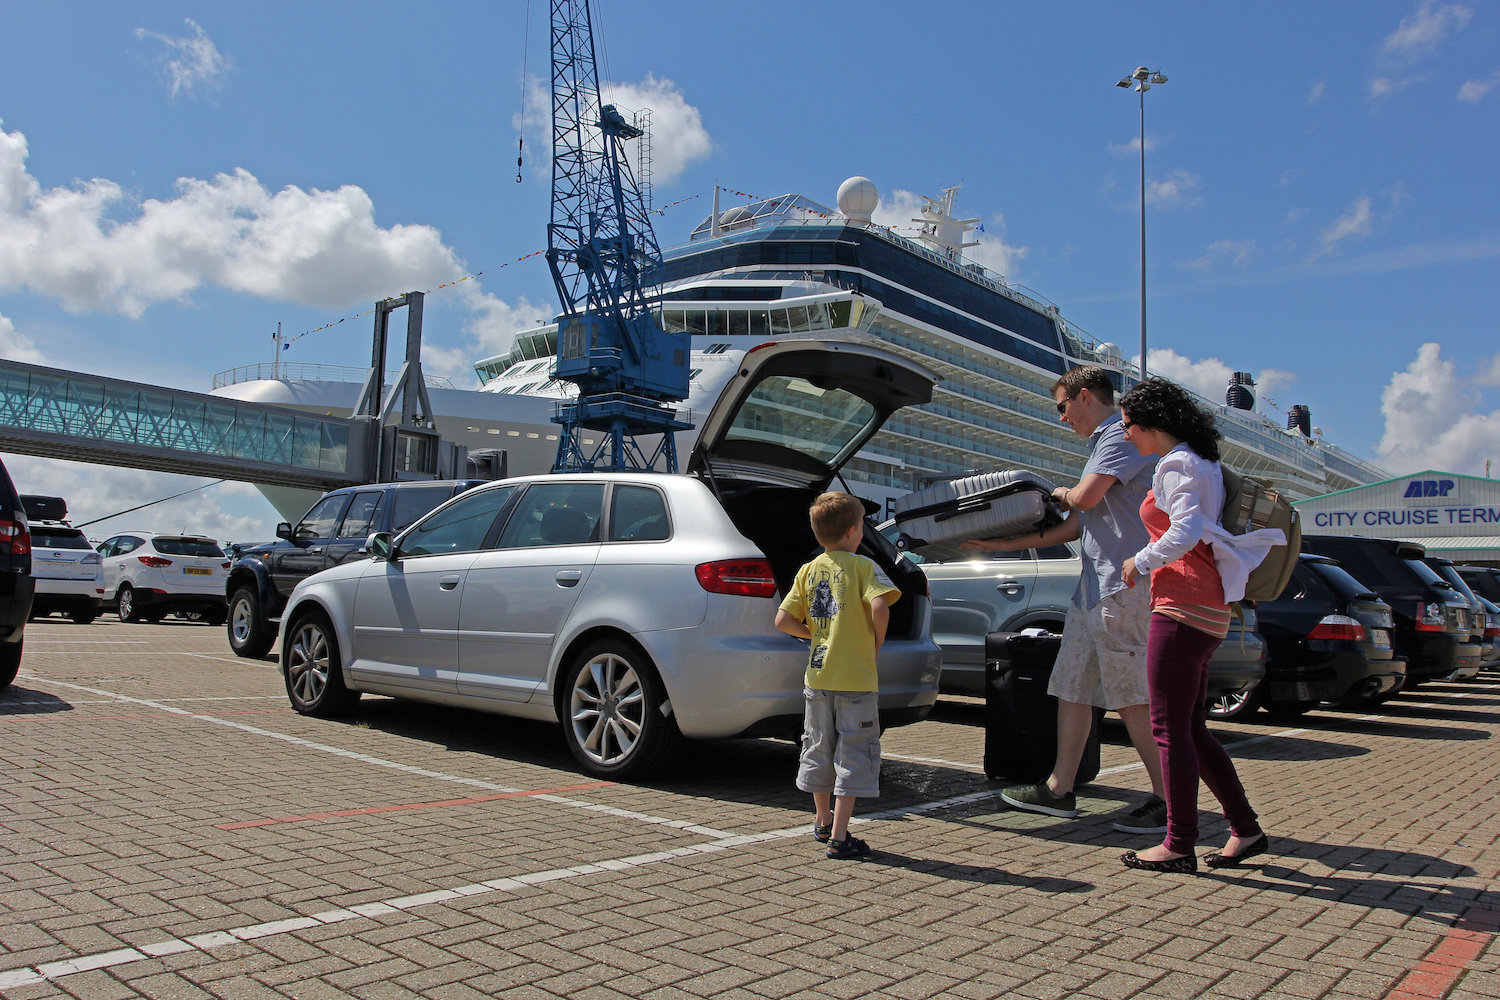 cruises from southampton parking